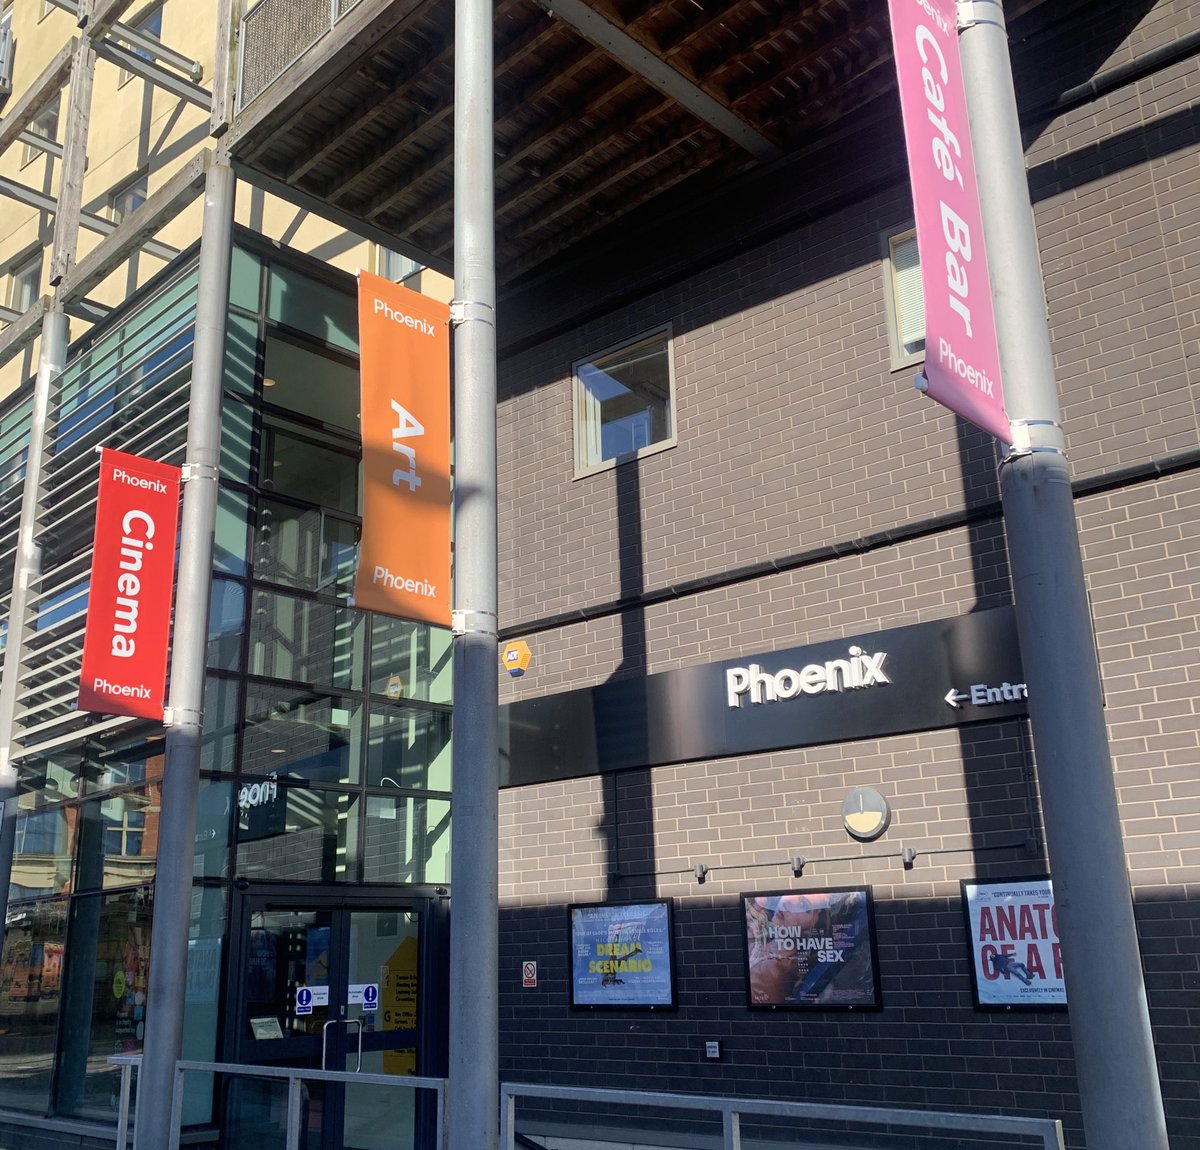 The team are spending a sunny day at @PhoenixLeic for #ScreeningDays! If you’re around, do say hi 👋